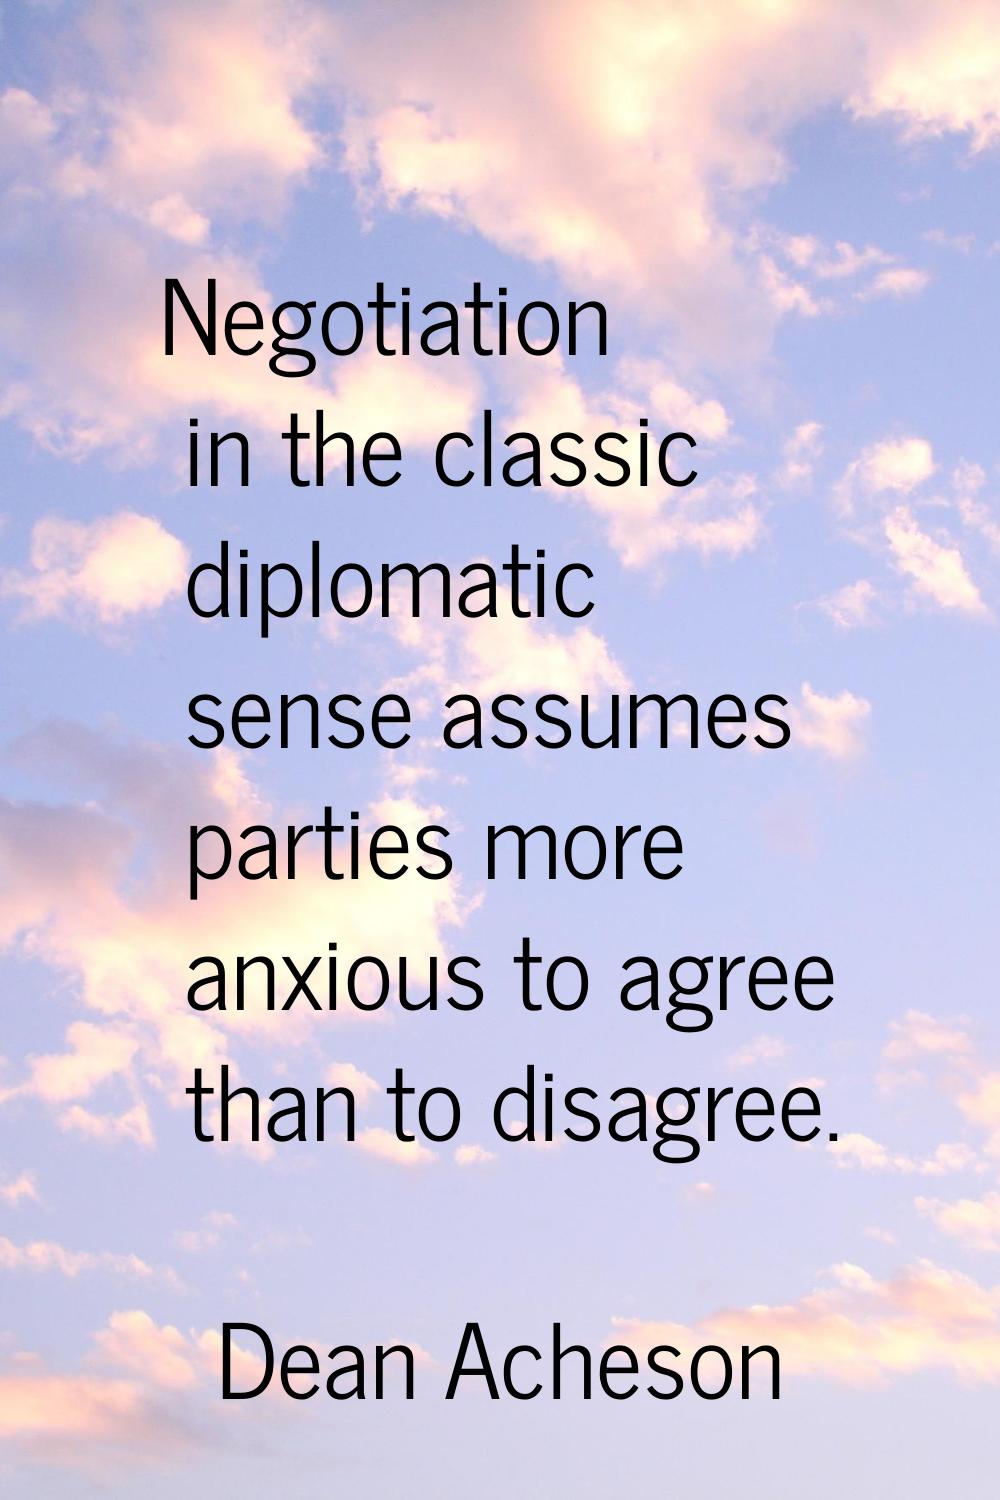 Negotiation in the classic diplomatic sense assumes parties more anxious to agree than to disagree.